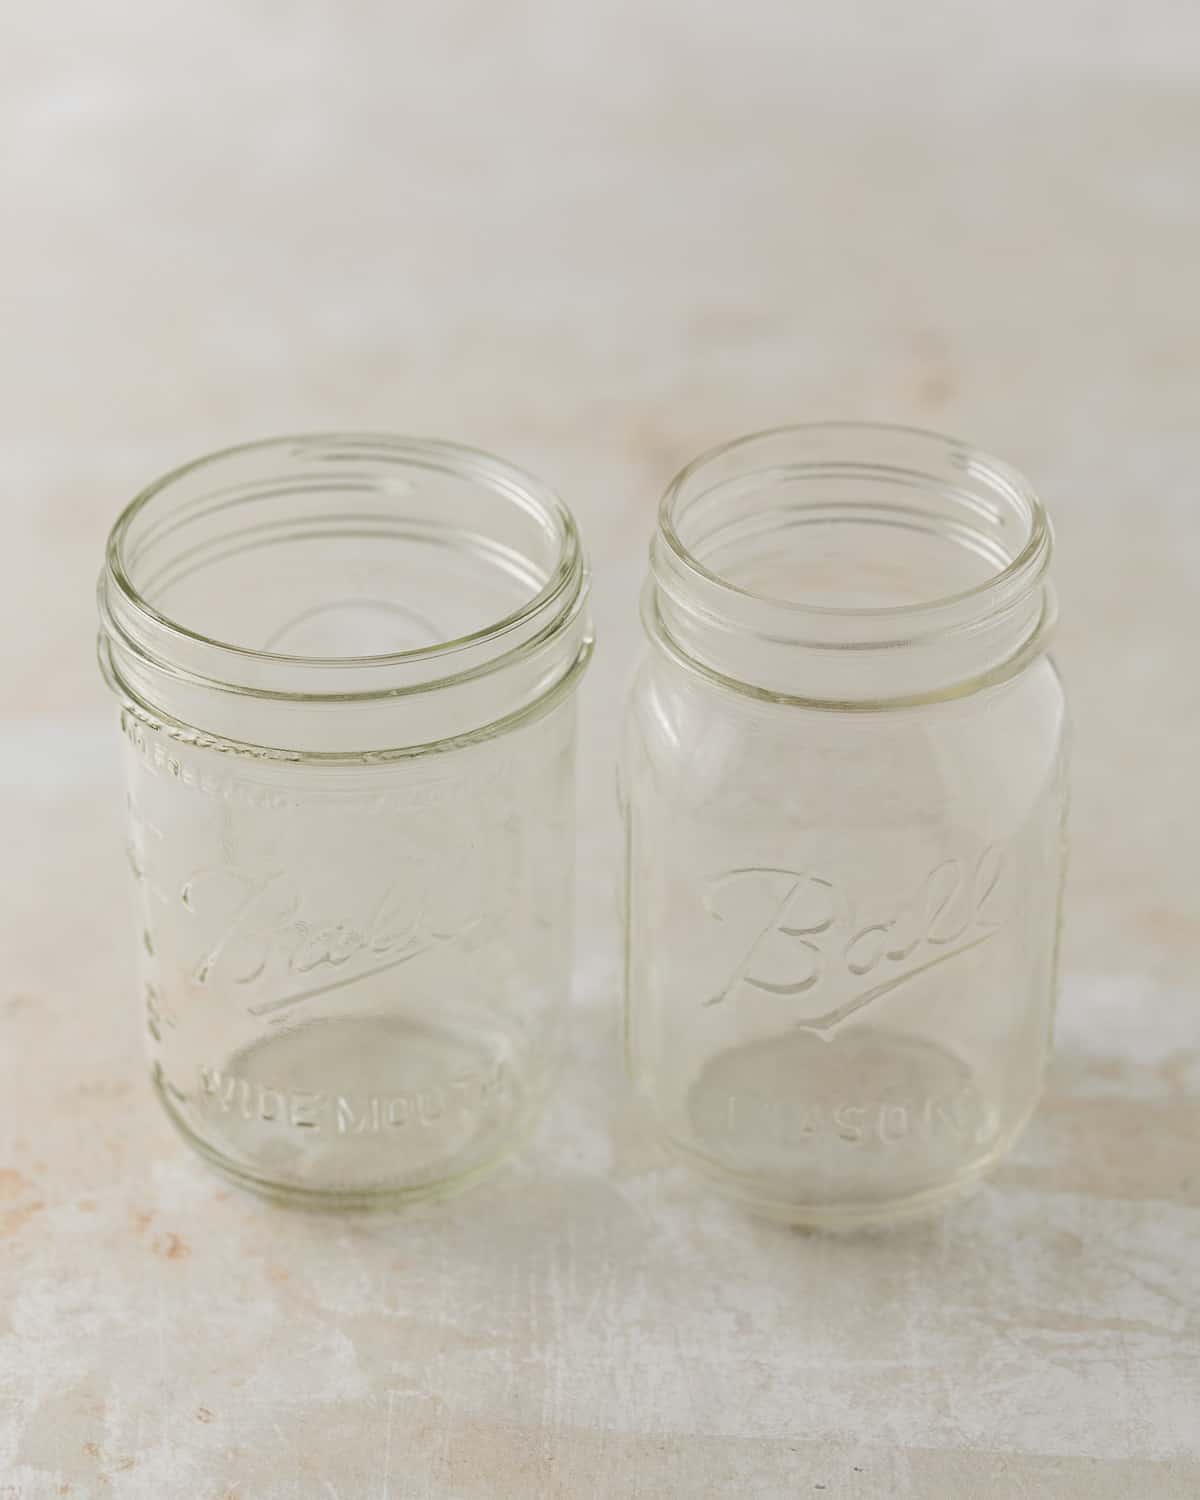 A wide-mouth 16-ounce jar and a regular-mouth 16 ounce jar.